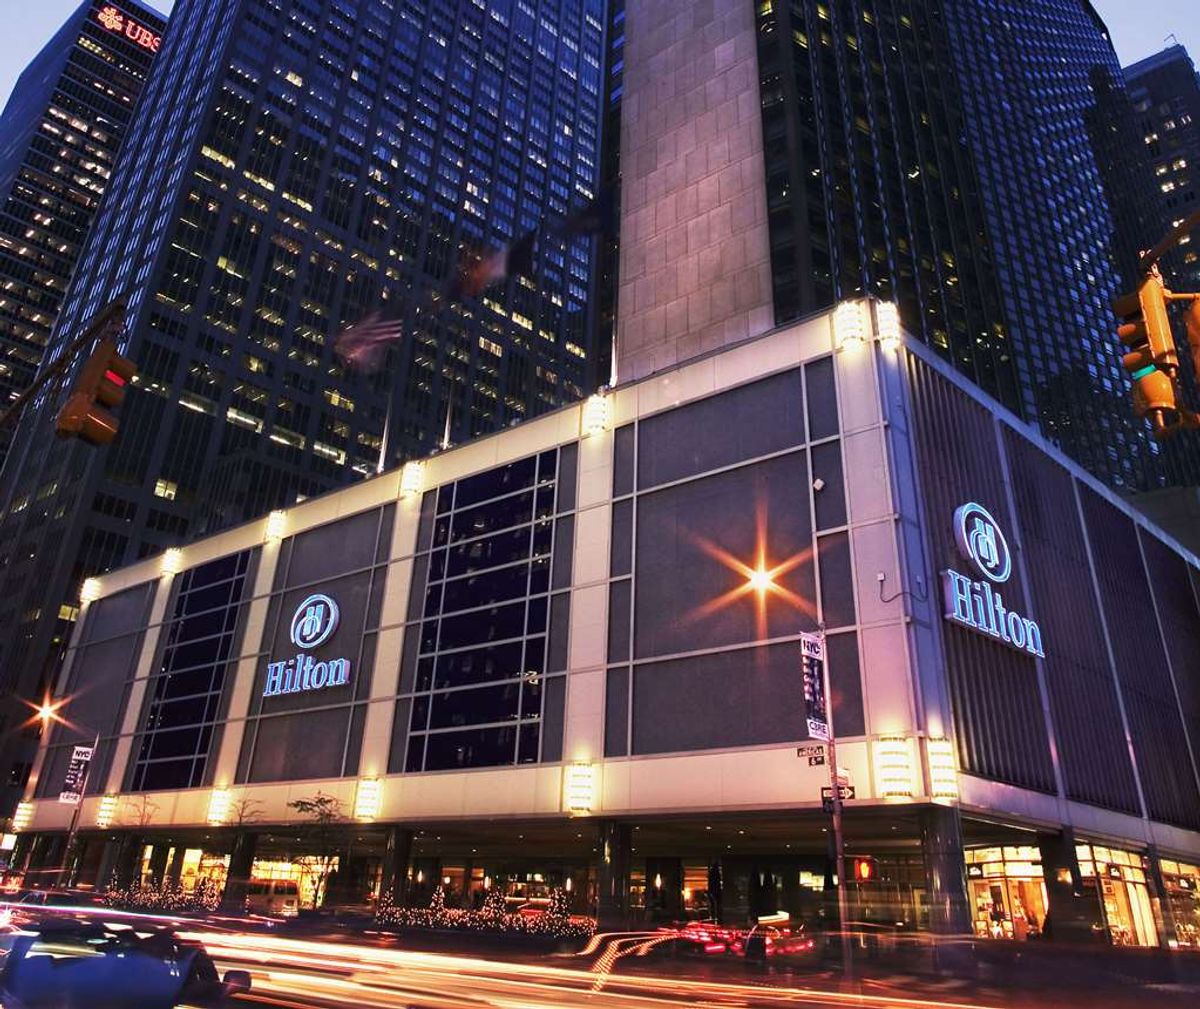 New York City Hotels - The West 57th Street by Hilton Club